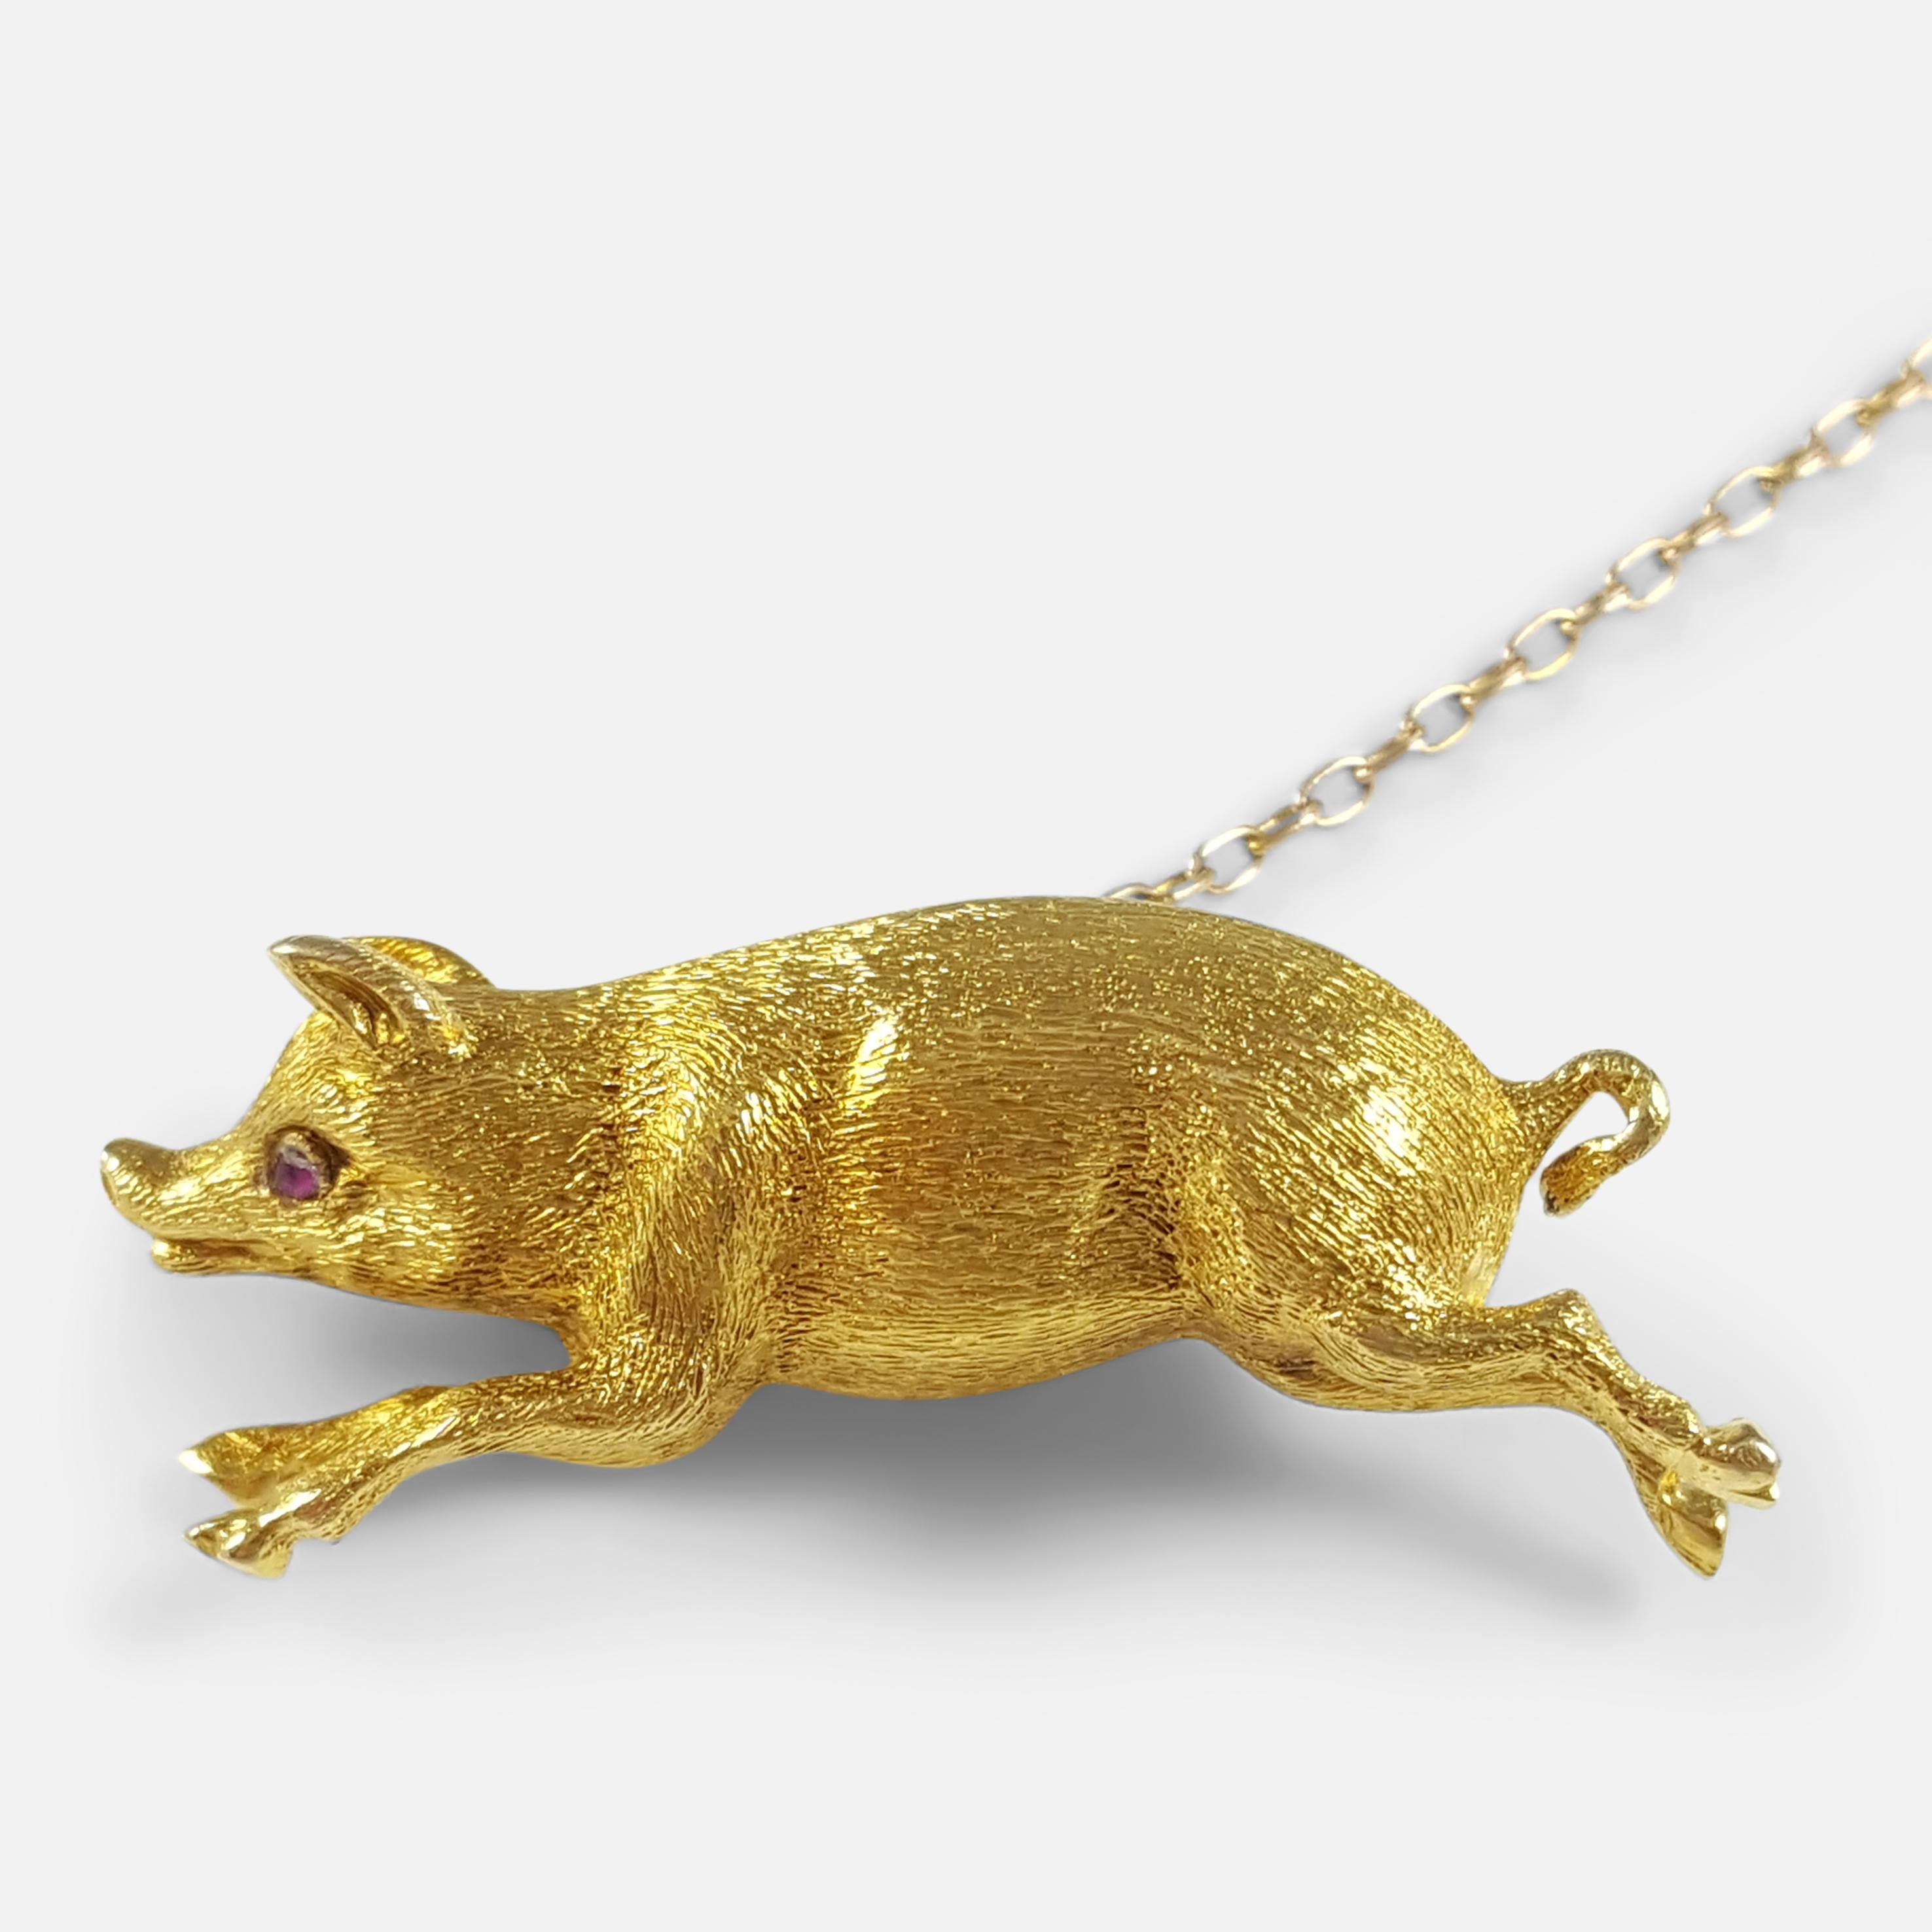 Description: - This is a beautiful, Edwardian 15 karat yellow gold pig brooch. The brooch is crafted in the form of a pig in full flight. The brooch is stamped '15ct' to the body to denote 15 karat (carat) gold. The pig has a ruby eye, which have